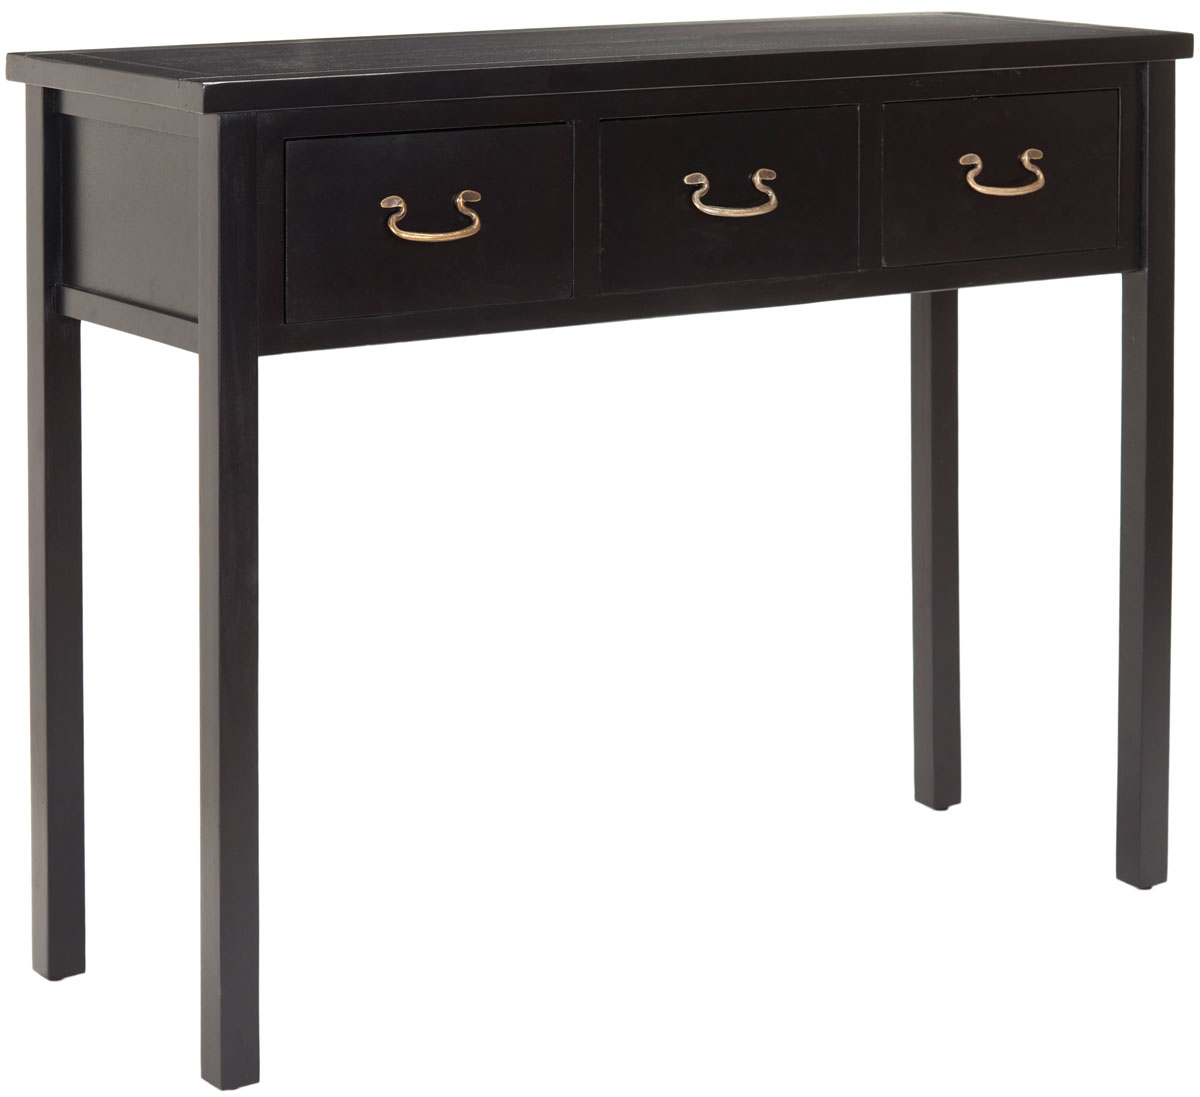 Cindy Console With Storage Drawers - Black - Safavieh - Image 3